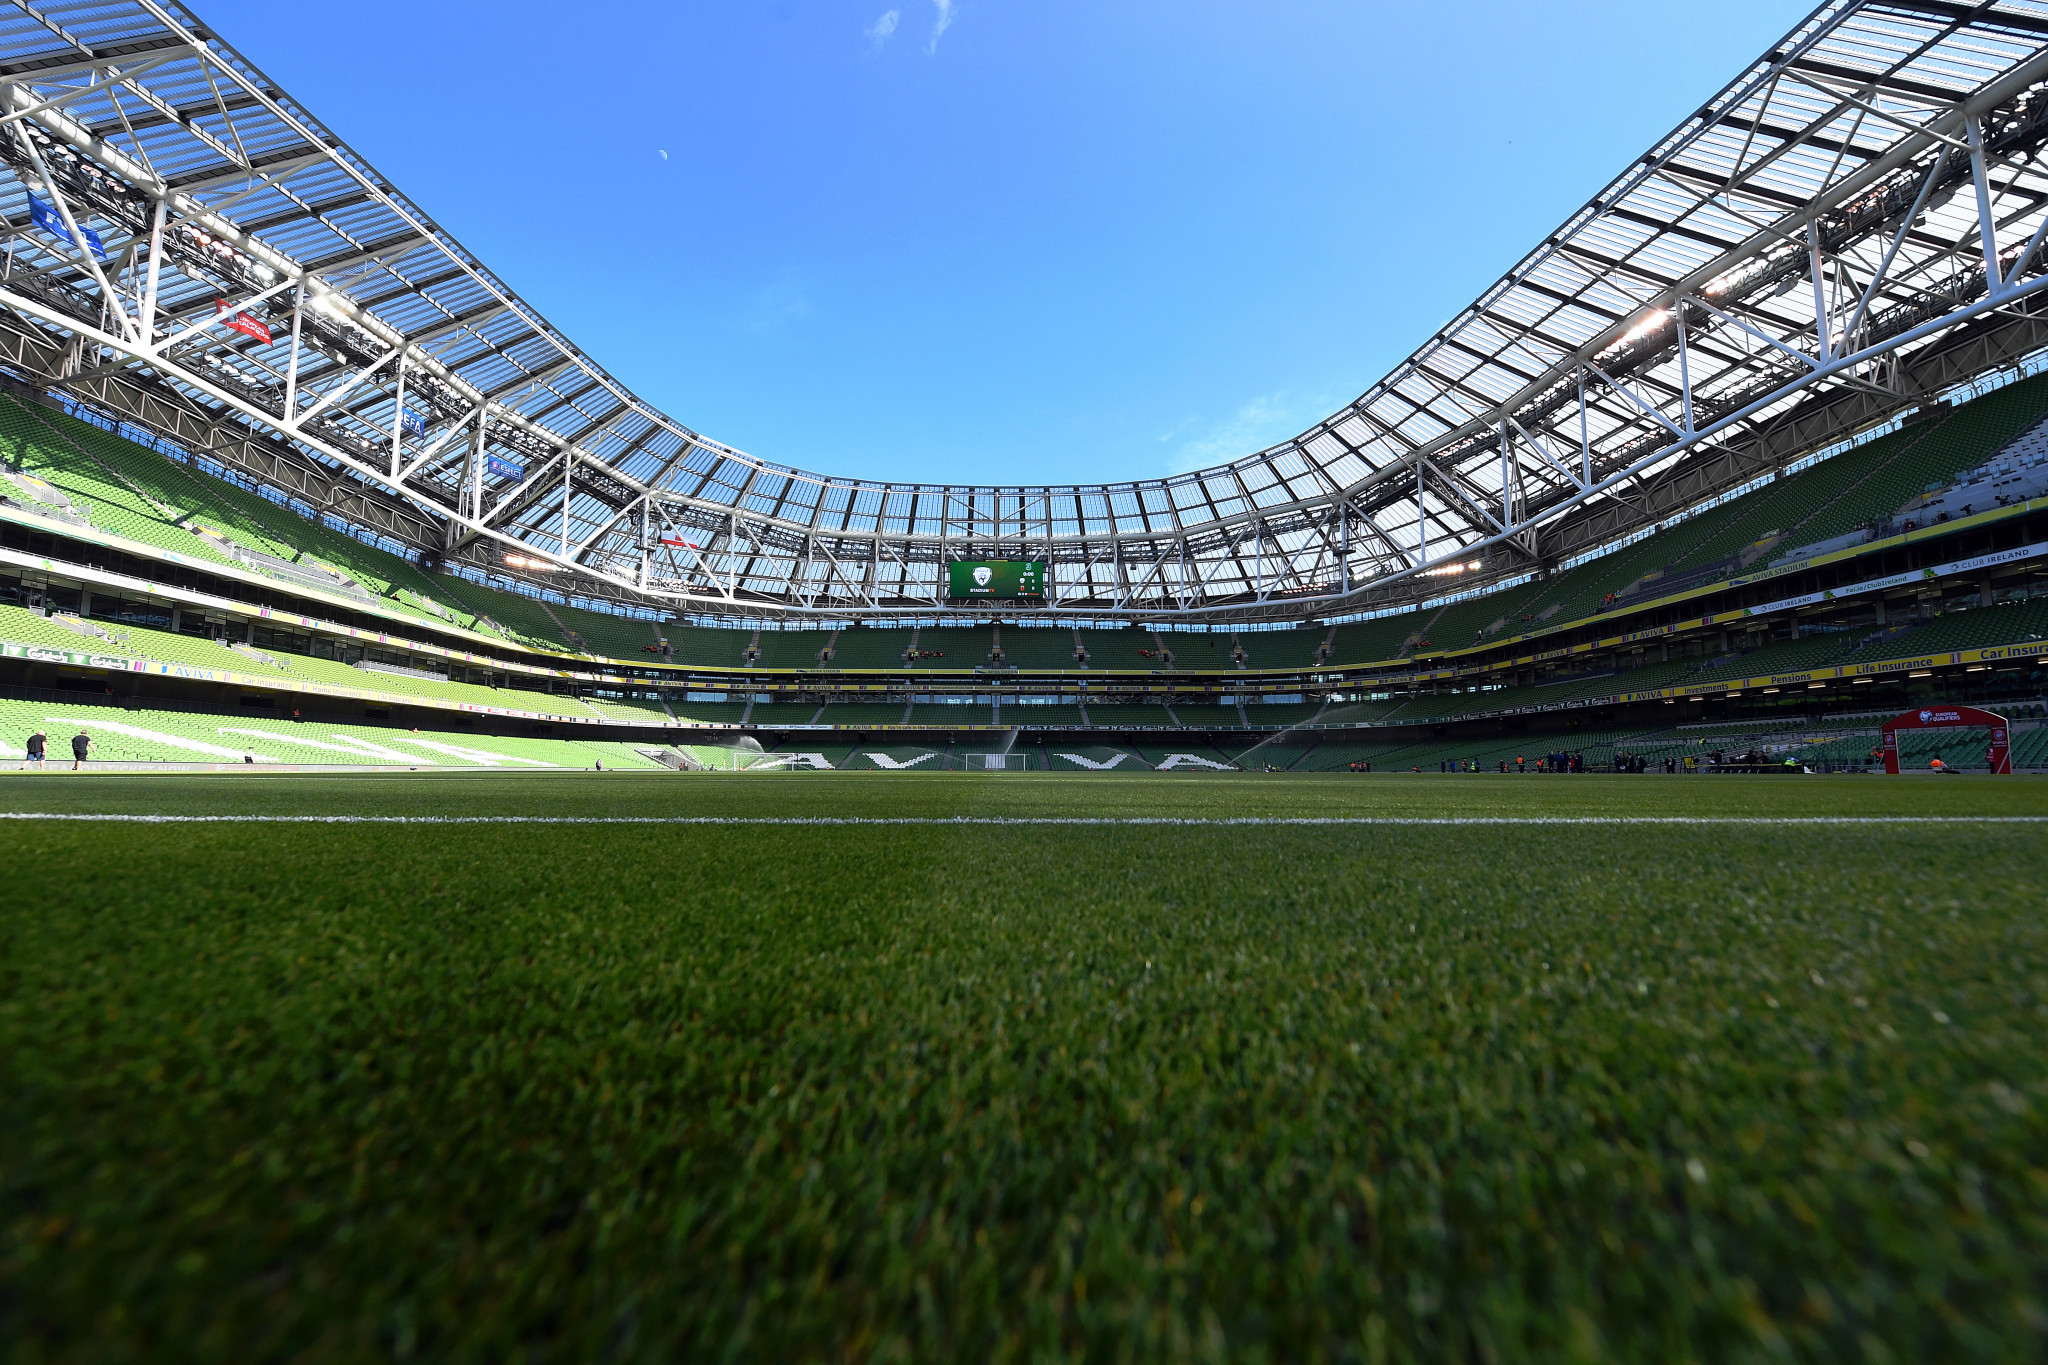 FAI chief executive Hill claims Ireland co-hosting Euro 2028 could spur Government funding